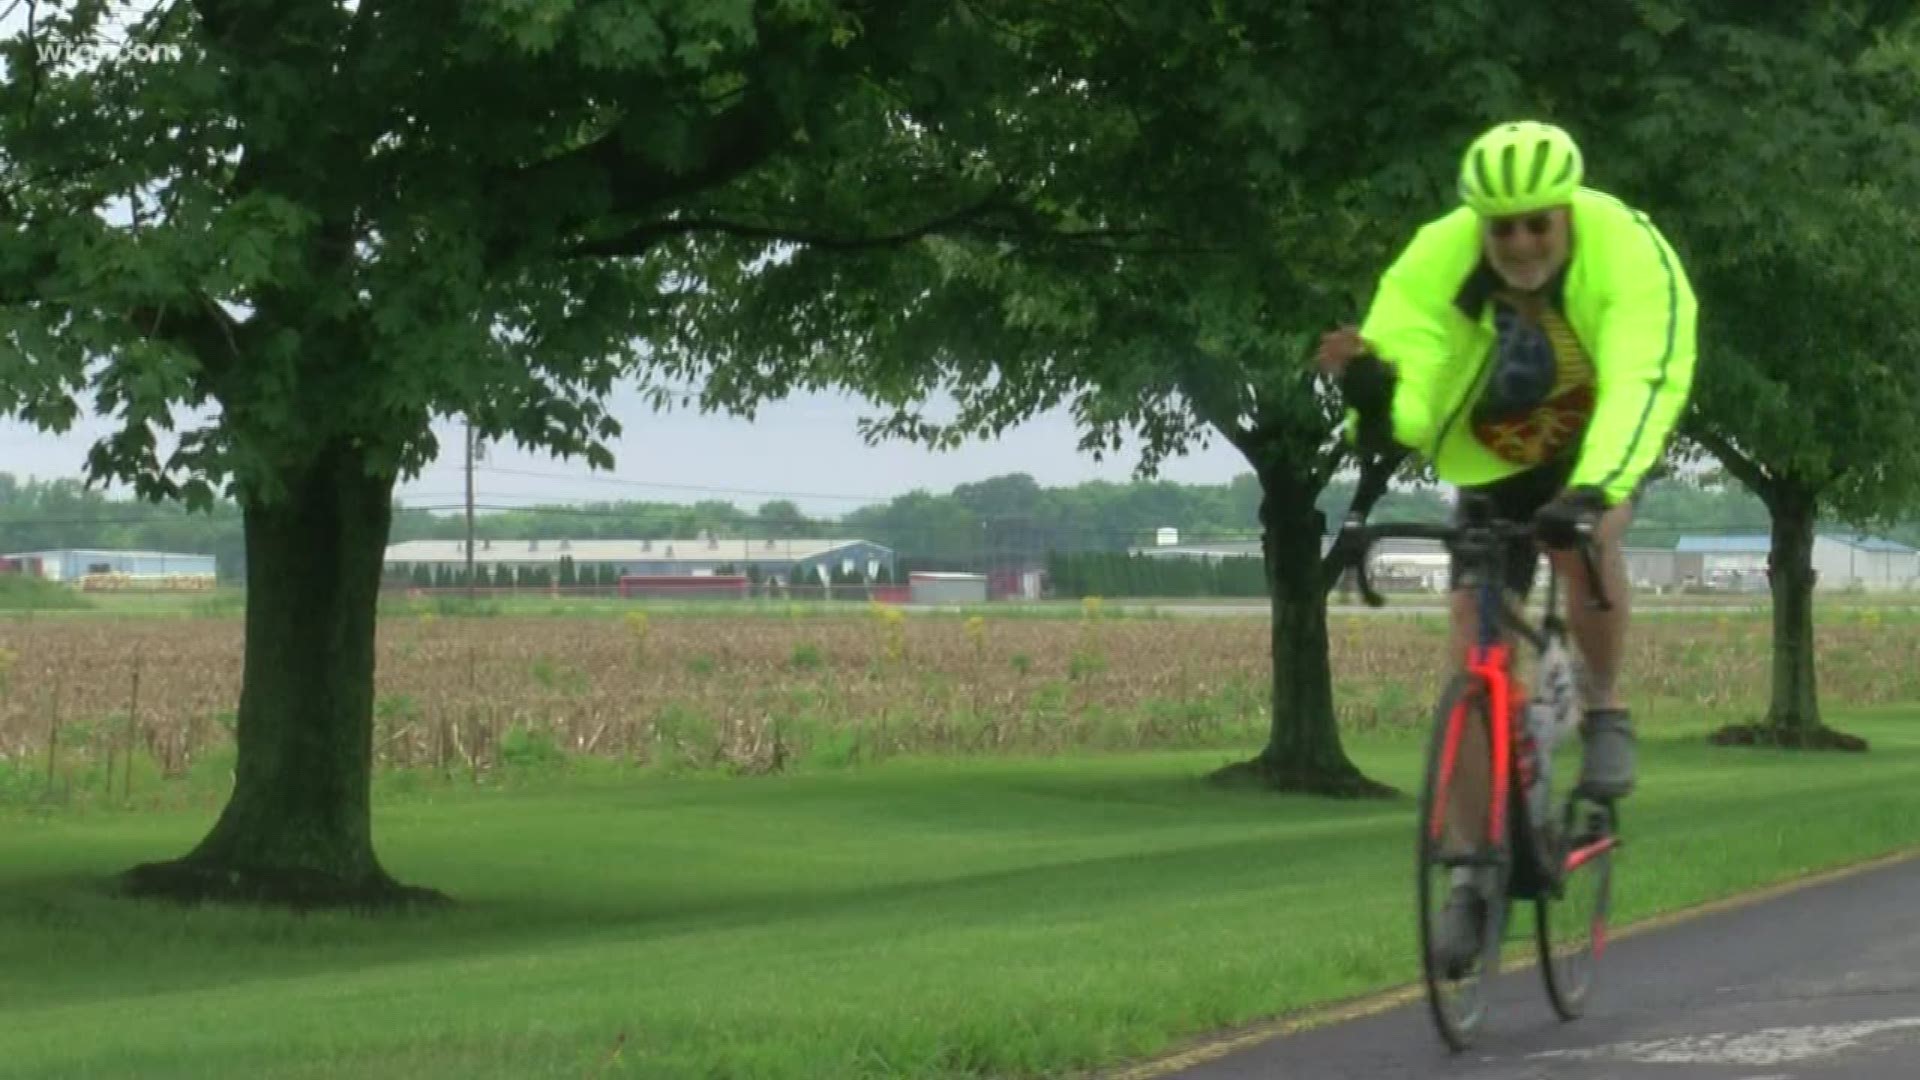 About 1,000 bikers from 35 states and four countries are in northwest Ohio touring a 140-mile course.